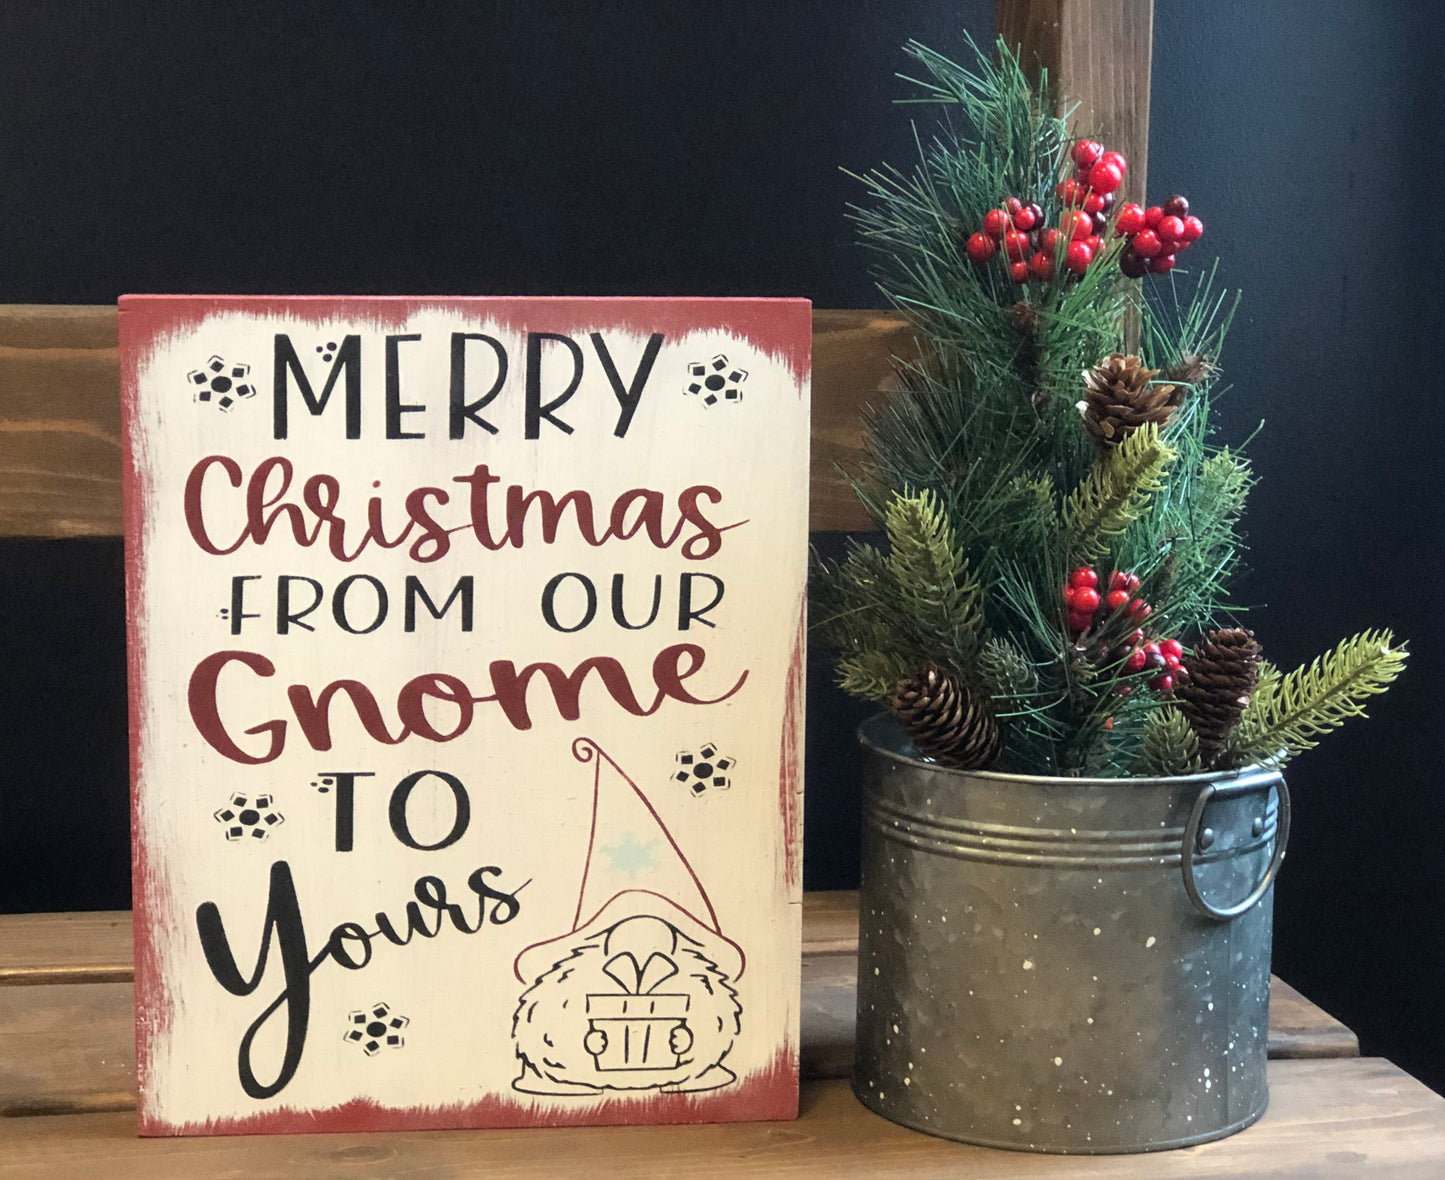 Our Gnome To Yours - Rustic Wood Christmas Sign